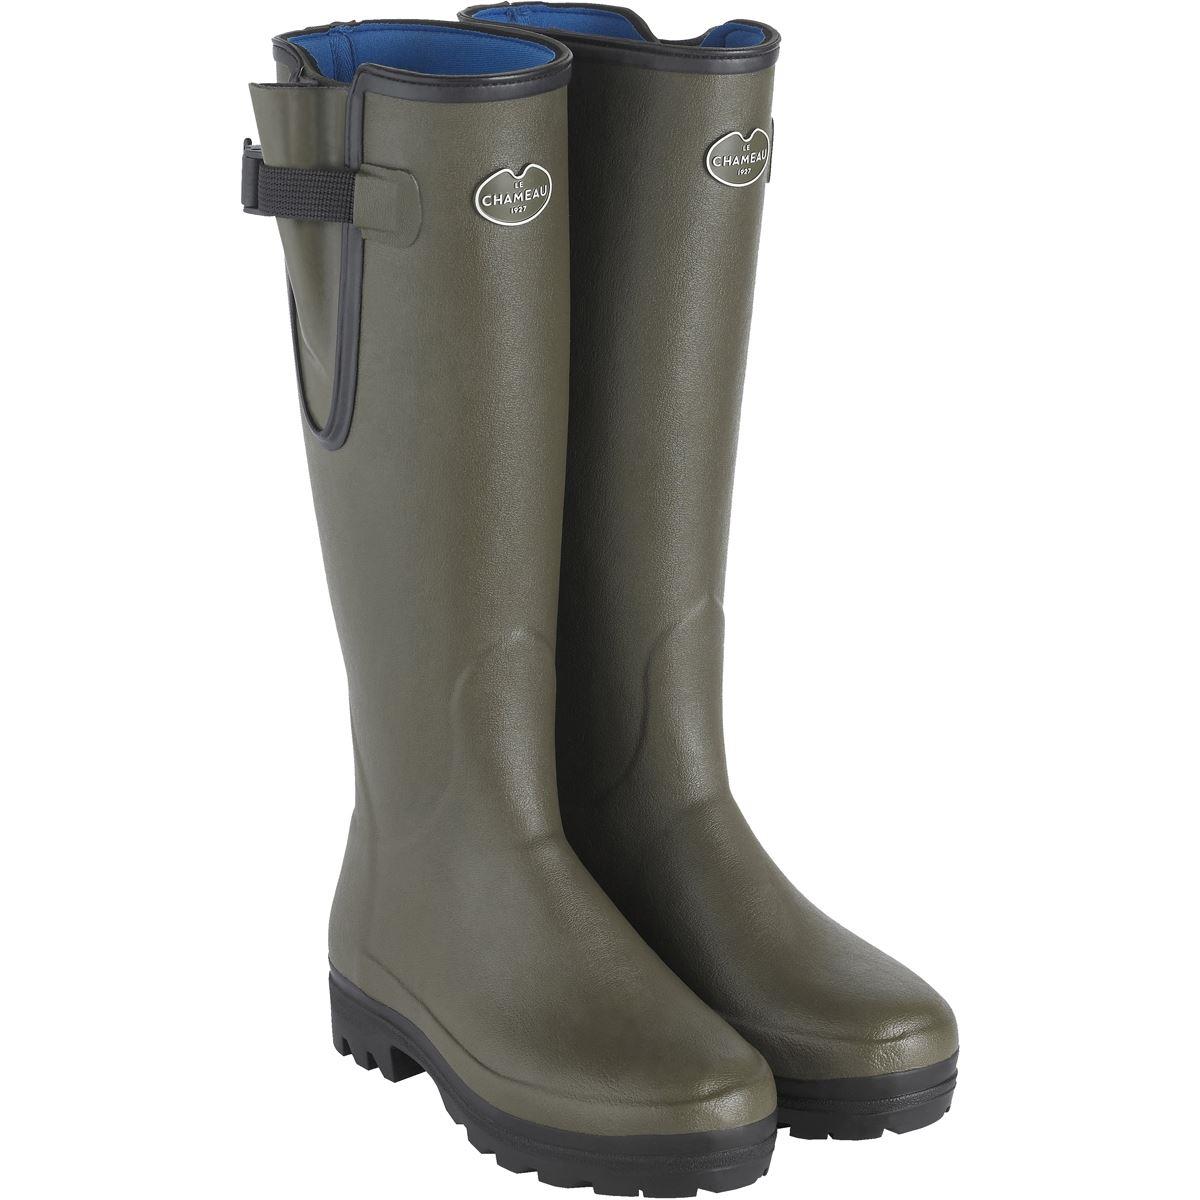 Why are Le Chameau wellies worth the money?